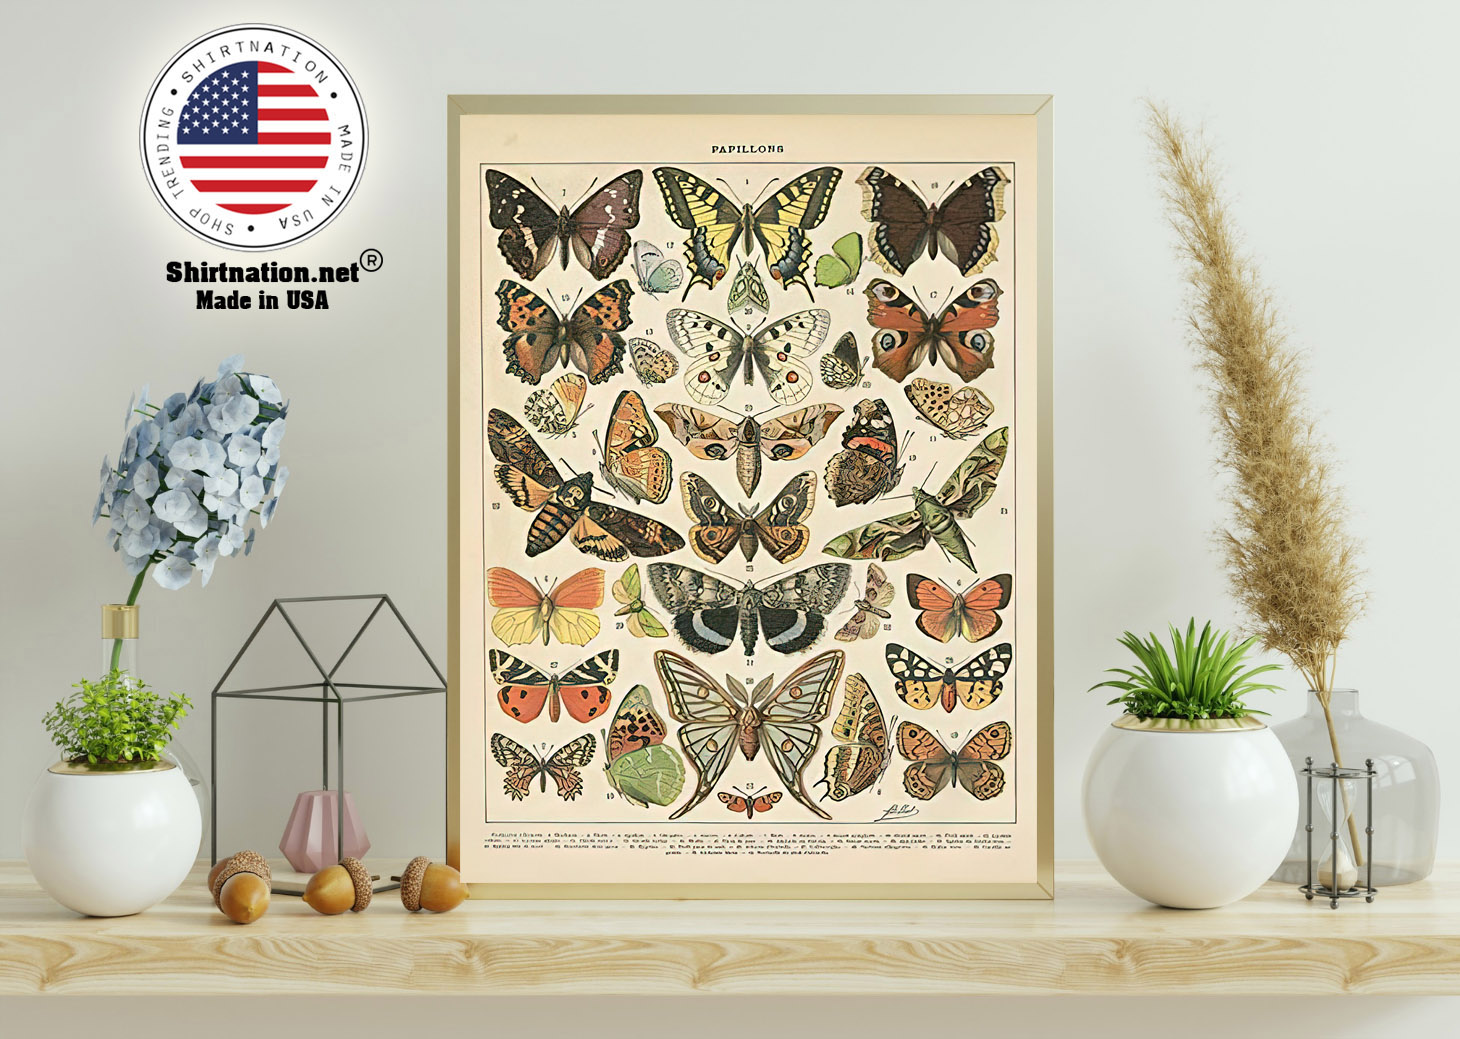 Popular vintage french types of papillons butterflies poster 11